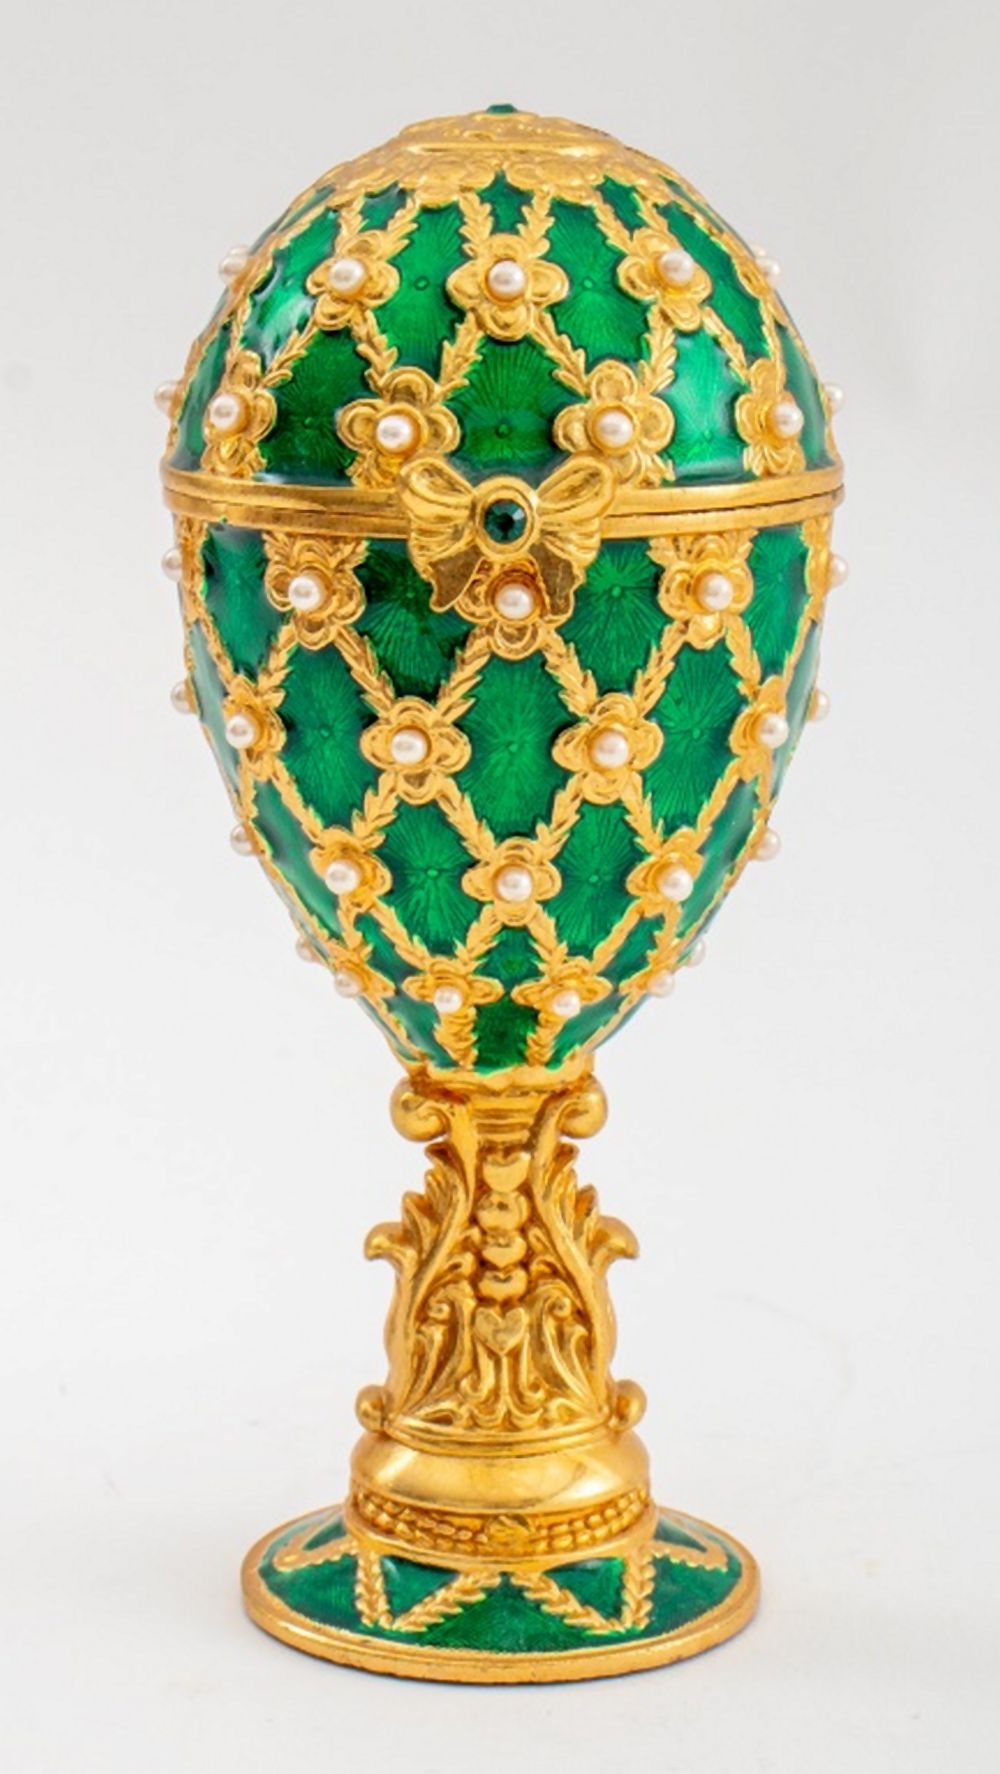 FABERGE STYLE GREEN EASTER EGG BY KRISCHENKO